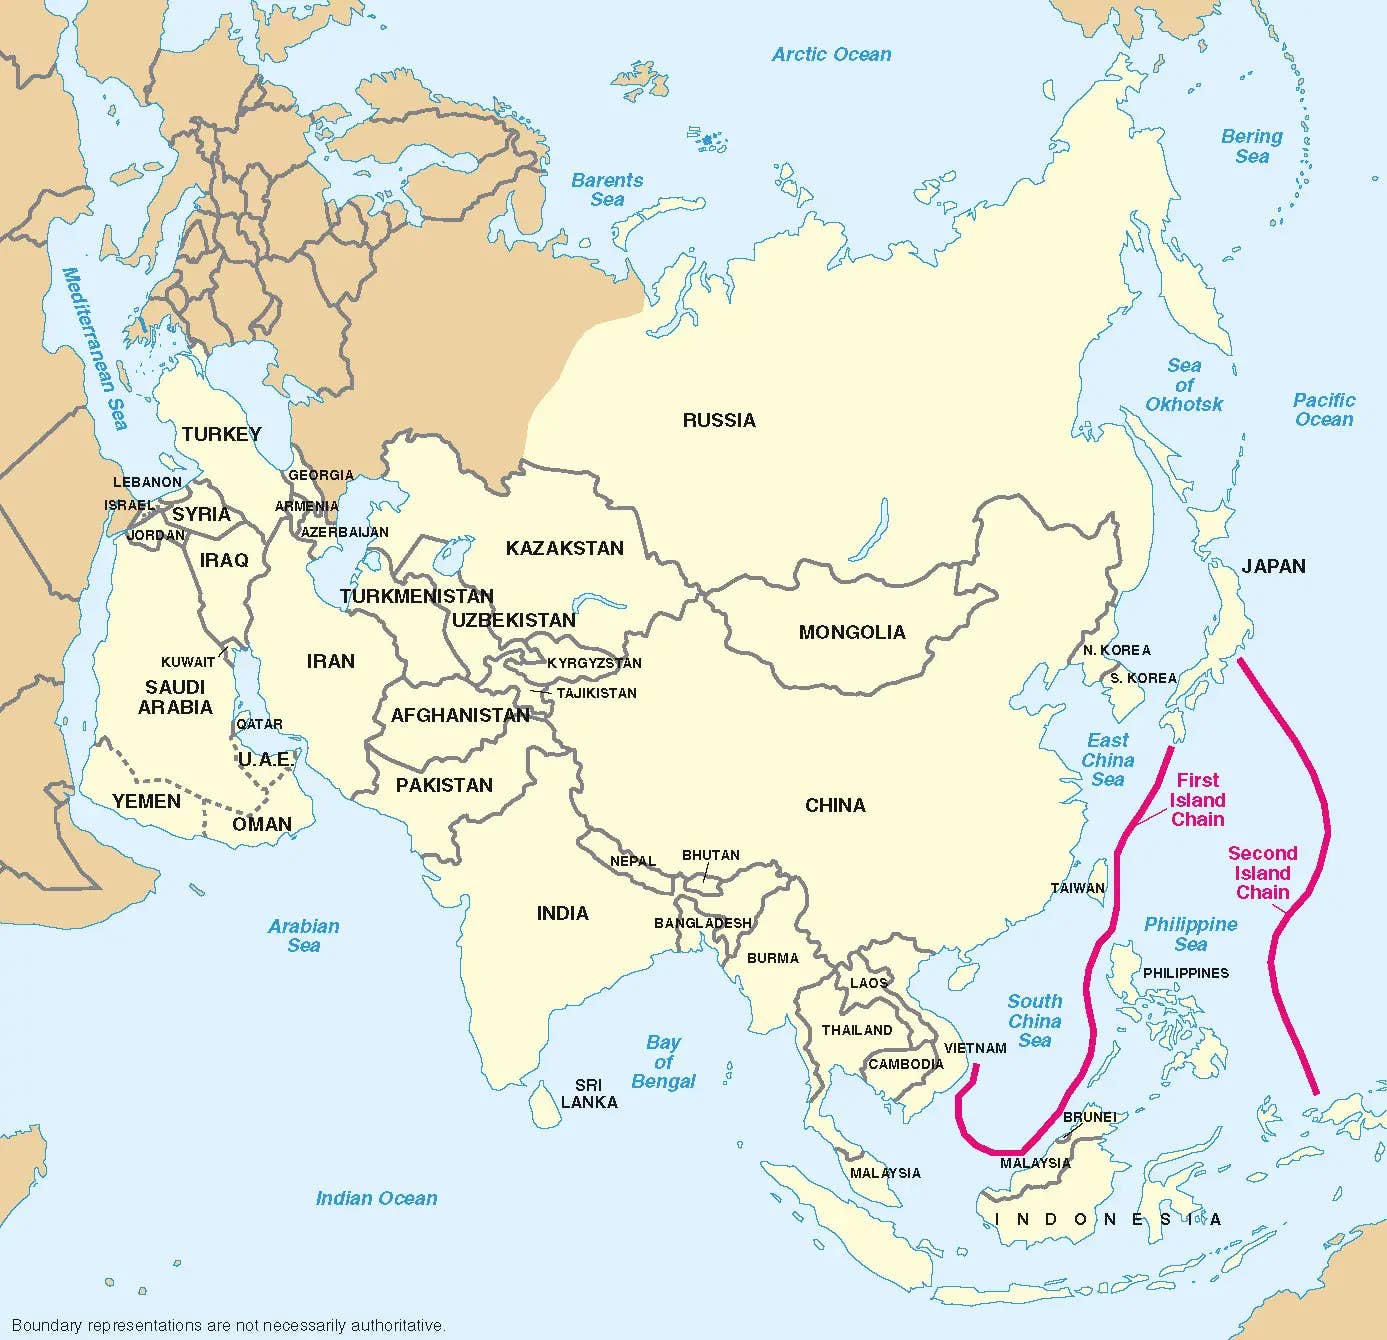 A map giving a general look at the First and Second Island Chain boundaries in the Western Pacific. <em>DOD</em>